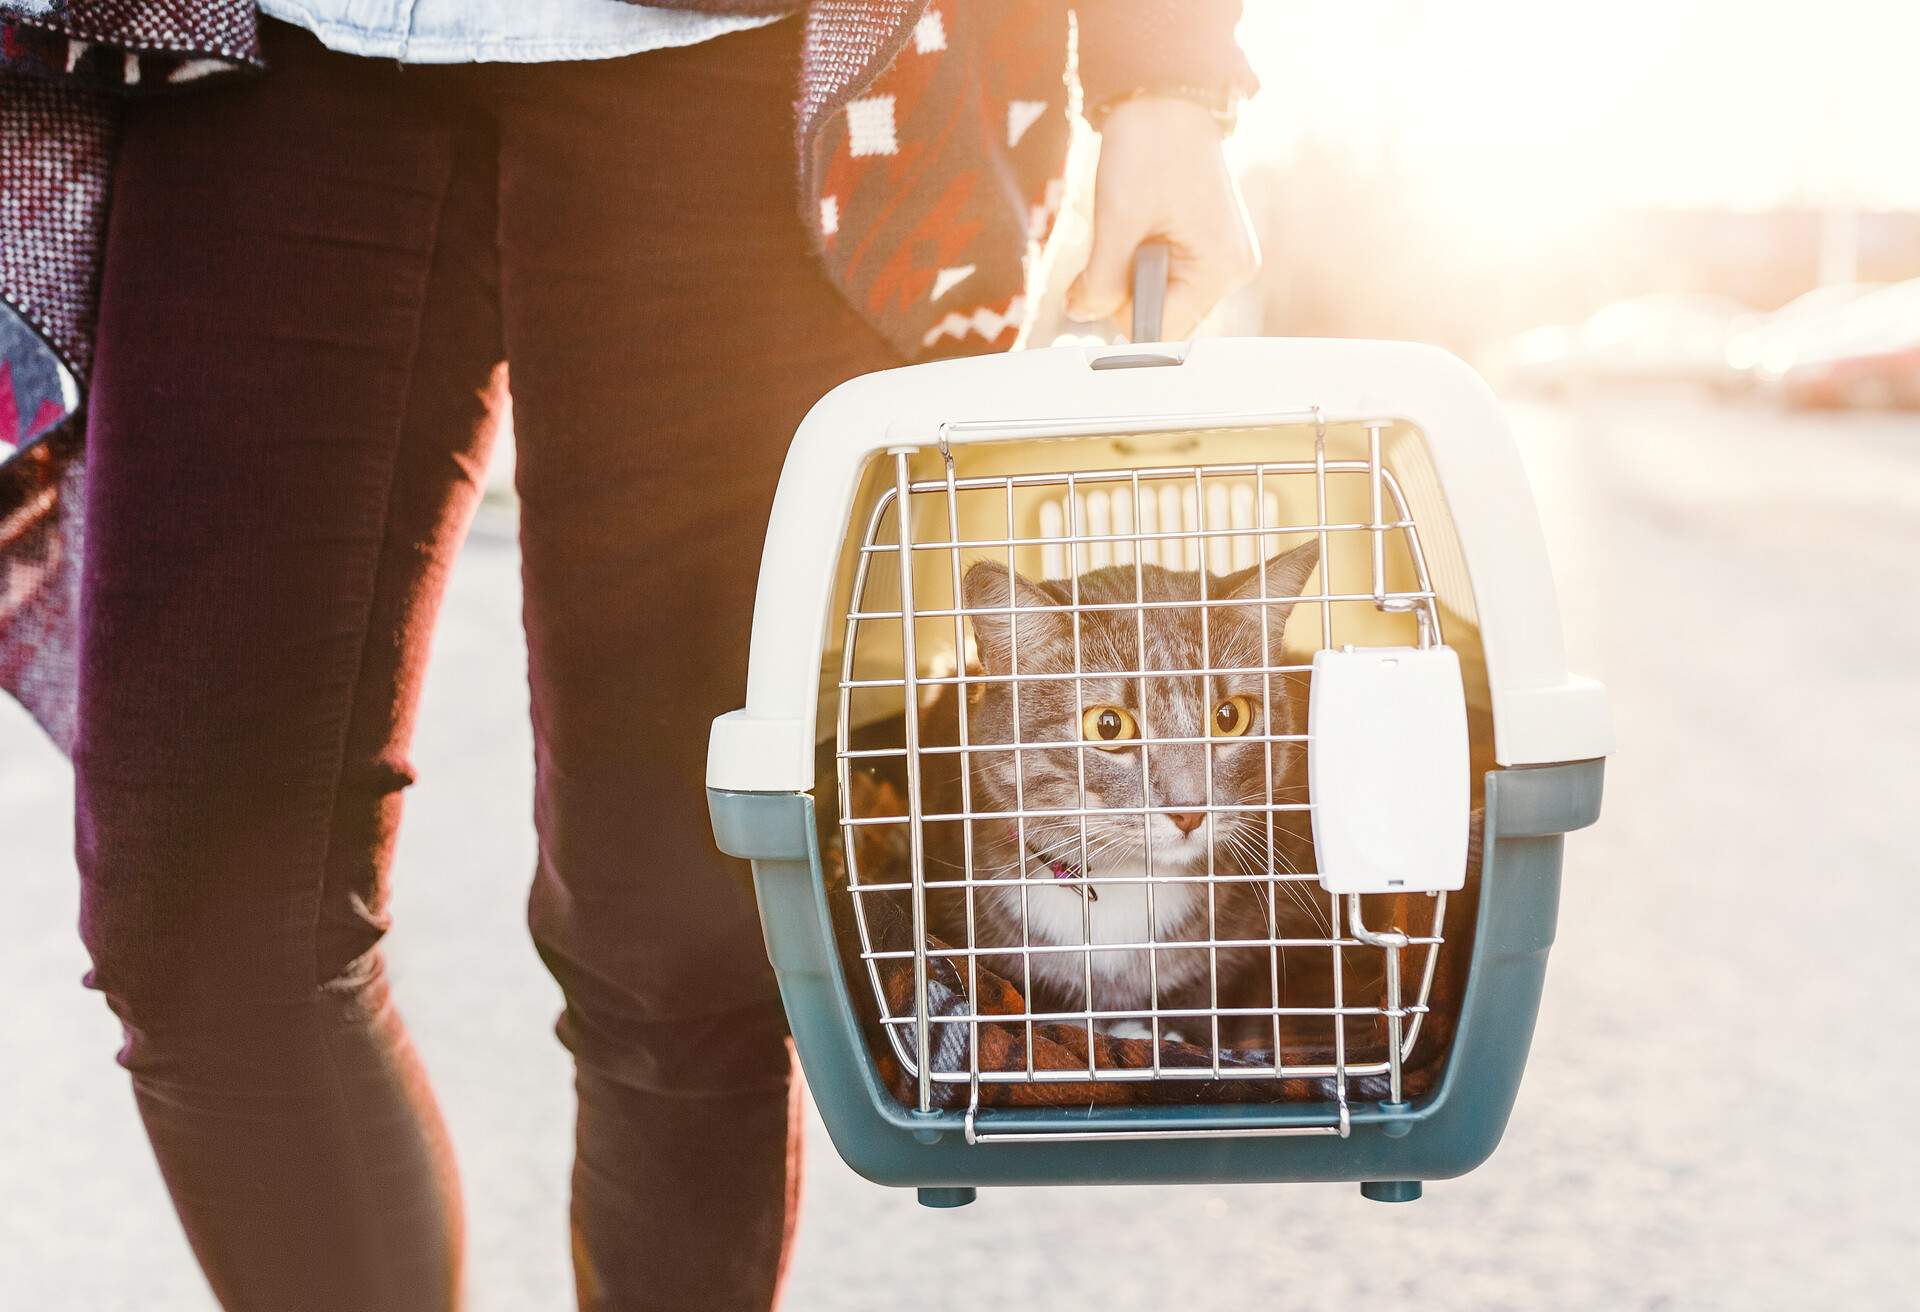 A woman is transporting a cat in a special plastic cage or carrying bag to a veterinary clinic